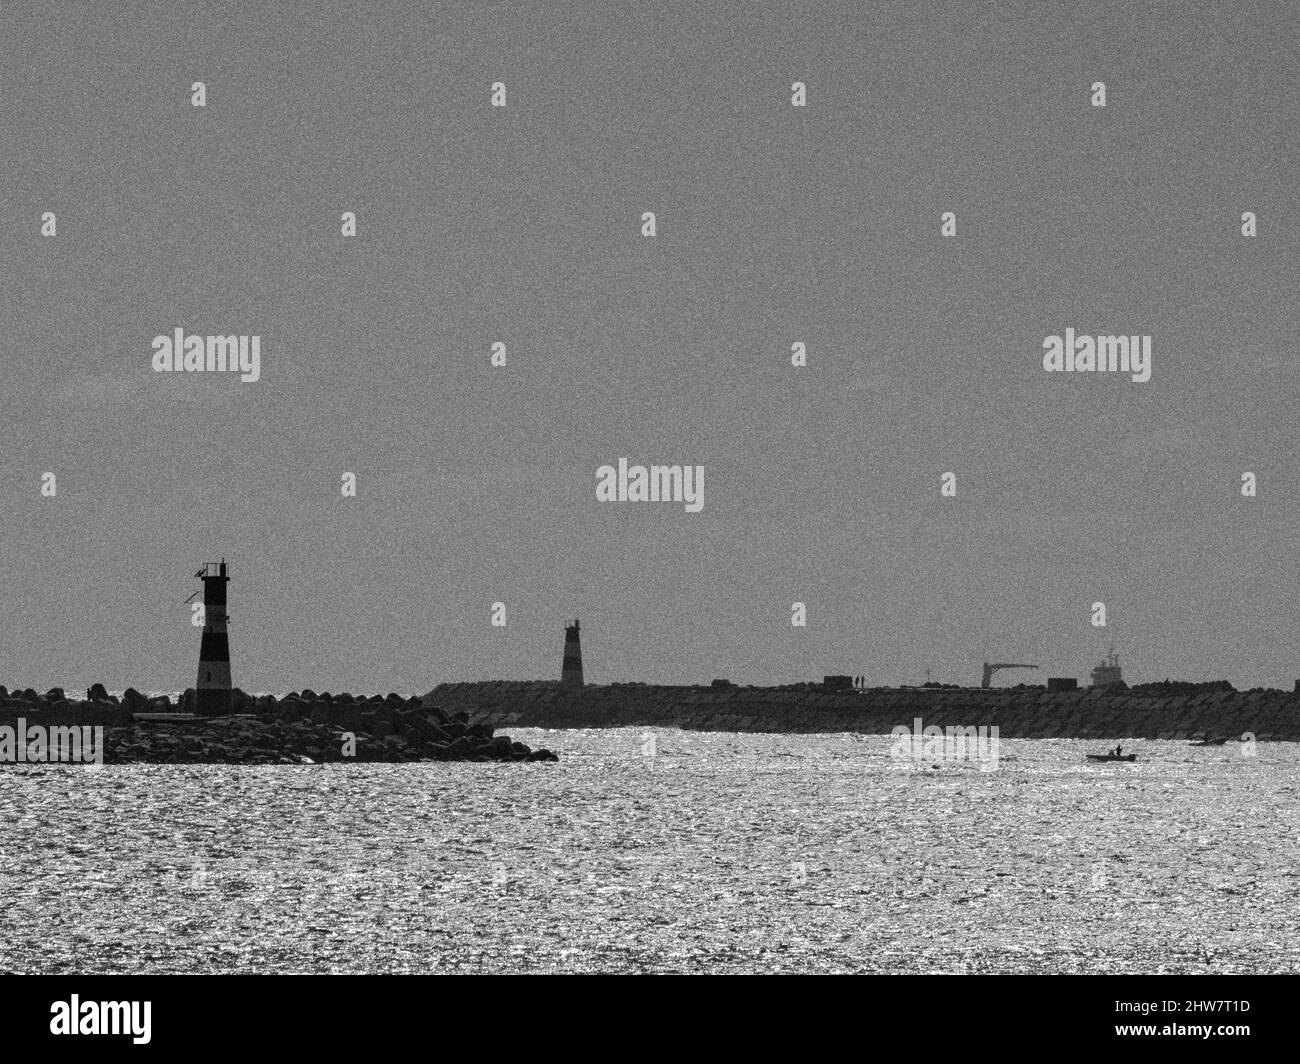 Grayscale of spurs and lighthouses against the seascape on Barra beach, Aveiro, Portugal Stock Photo